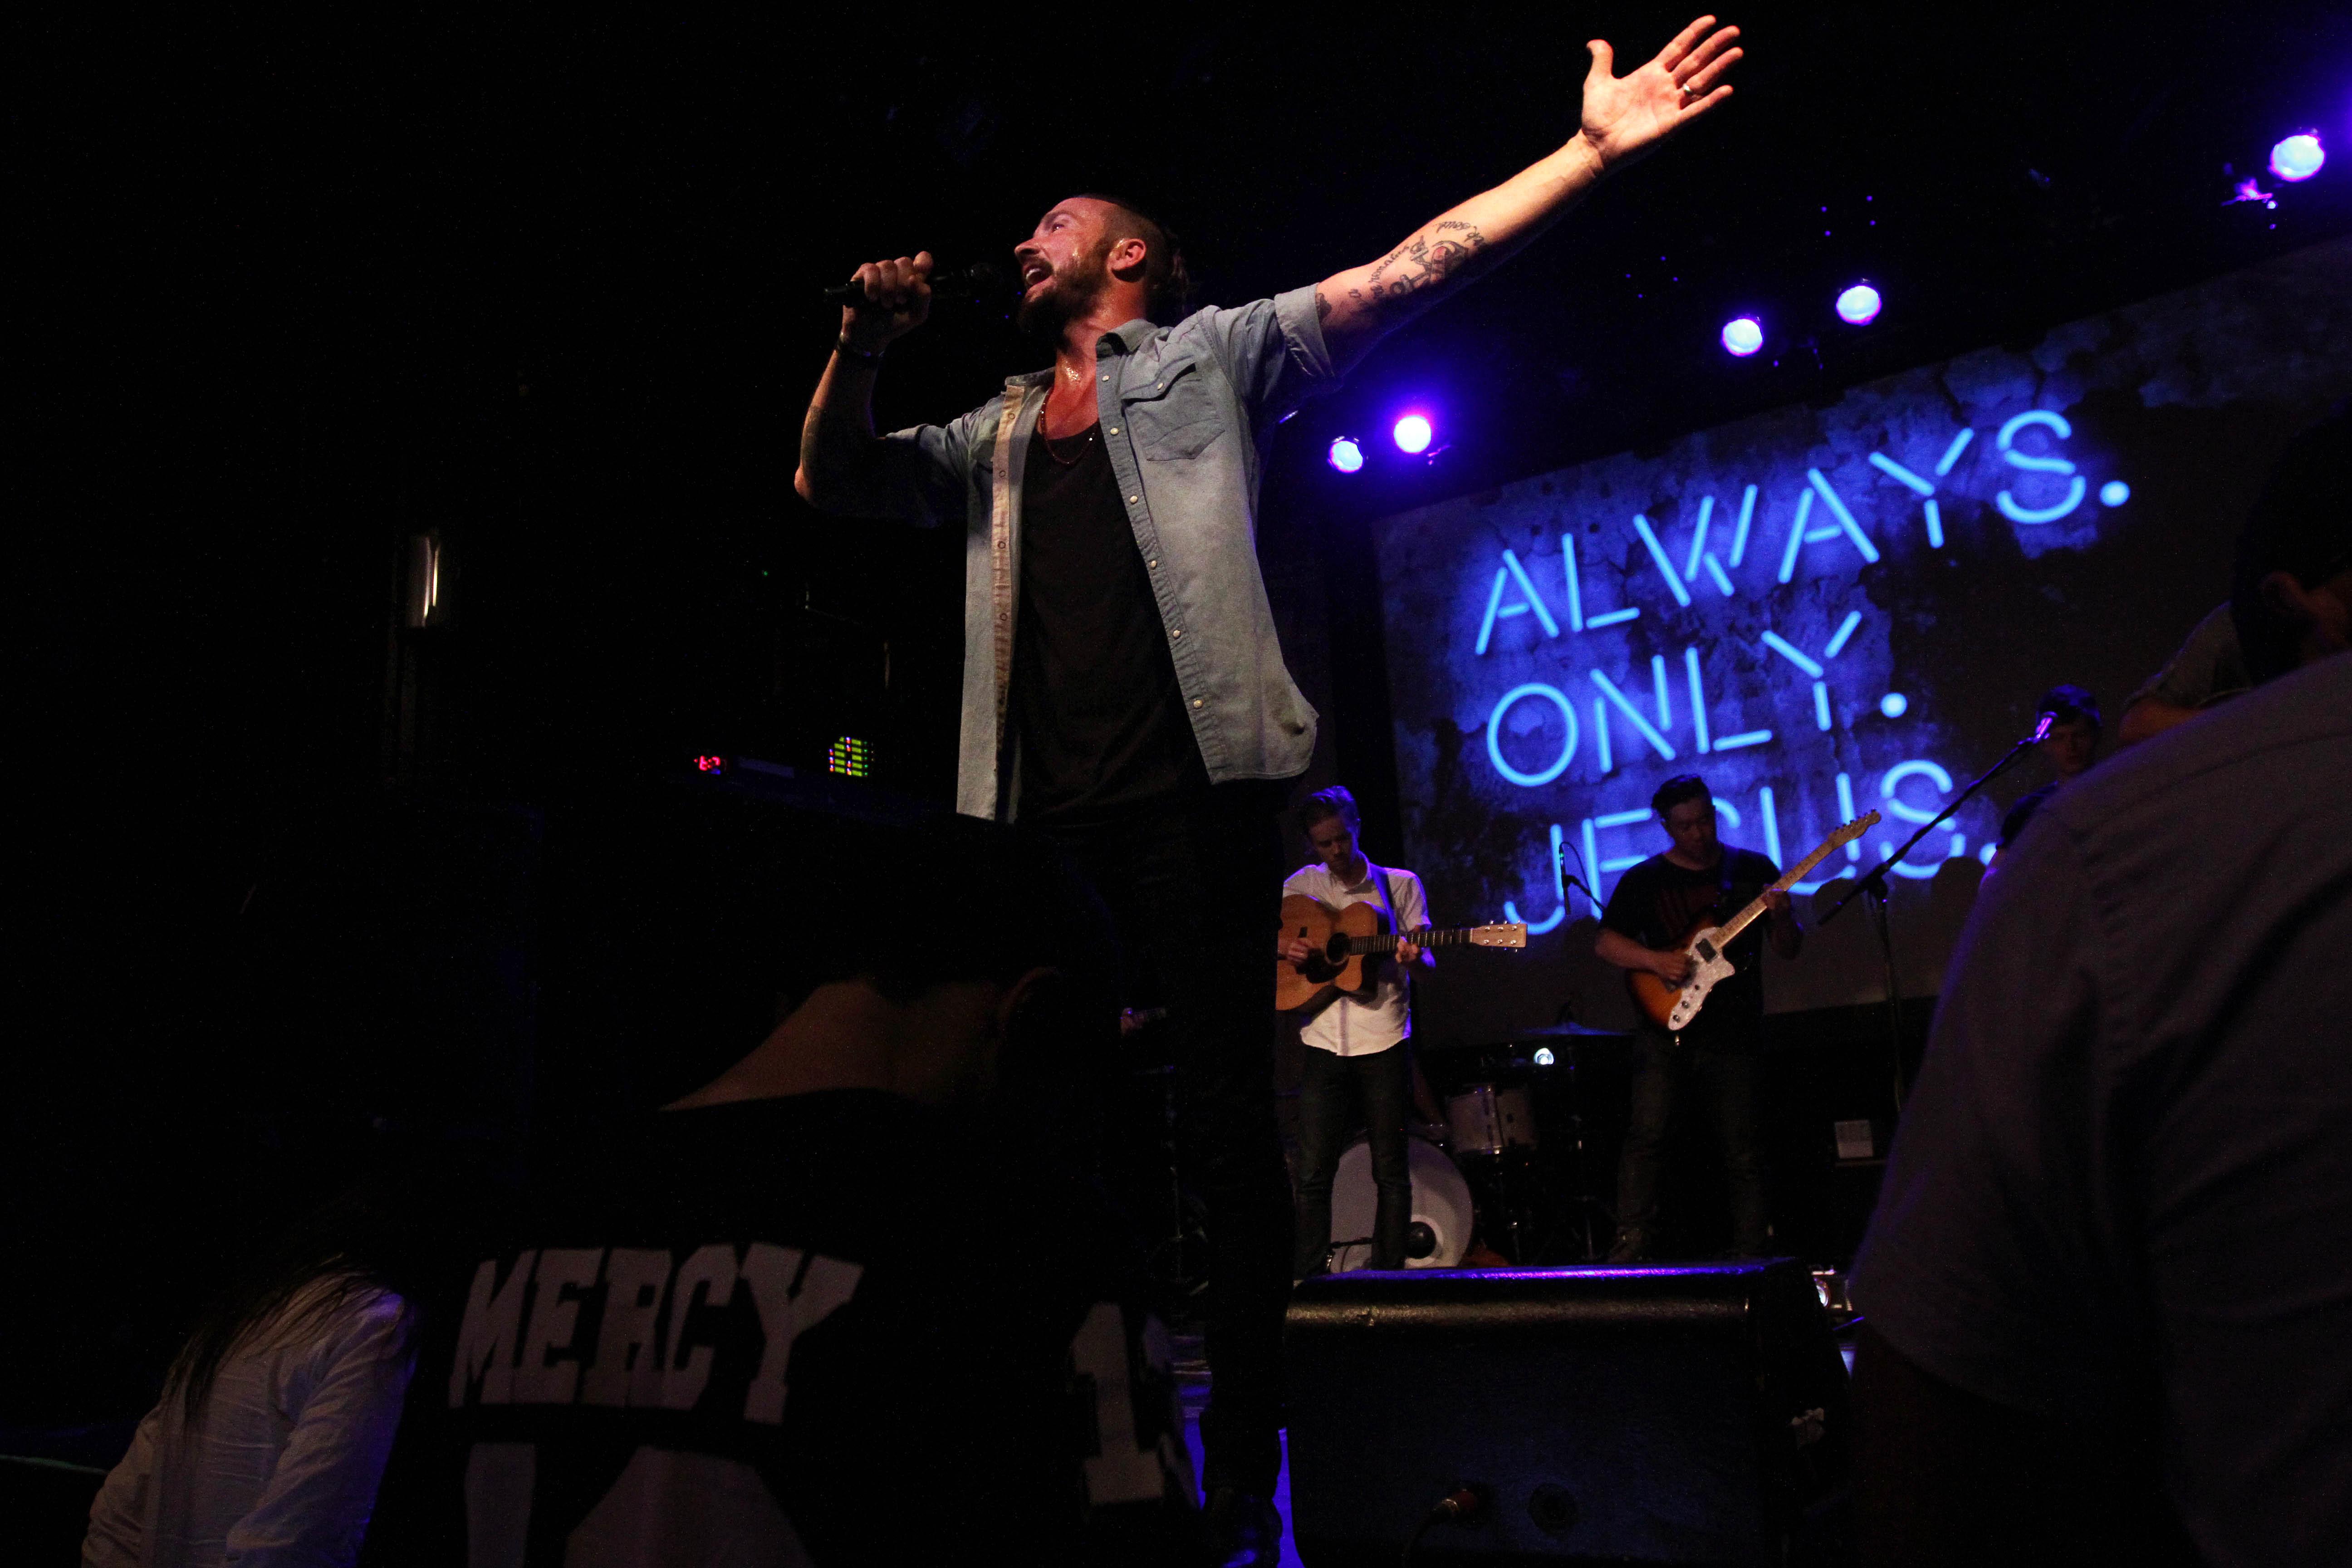 In this July 14, 2013 photo, Pastor Carl Lentz leads a Hillsong NYC Church service at Irving Plaza in New York. With his half-shaved head, jeans and tattoos, Lentz doesn't look like the typical religious leader. But with its concert-like atmosphere and appeal to a younger demographic, his congregation, Hillsong NYC, is one of the fastest growing evangelical churches in the city. (AP Photo/Tina Fineberg)